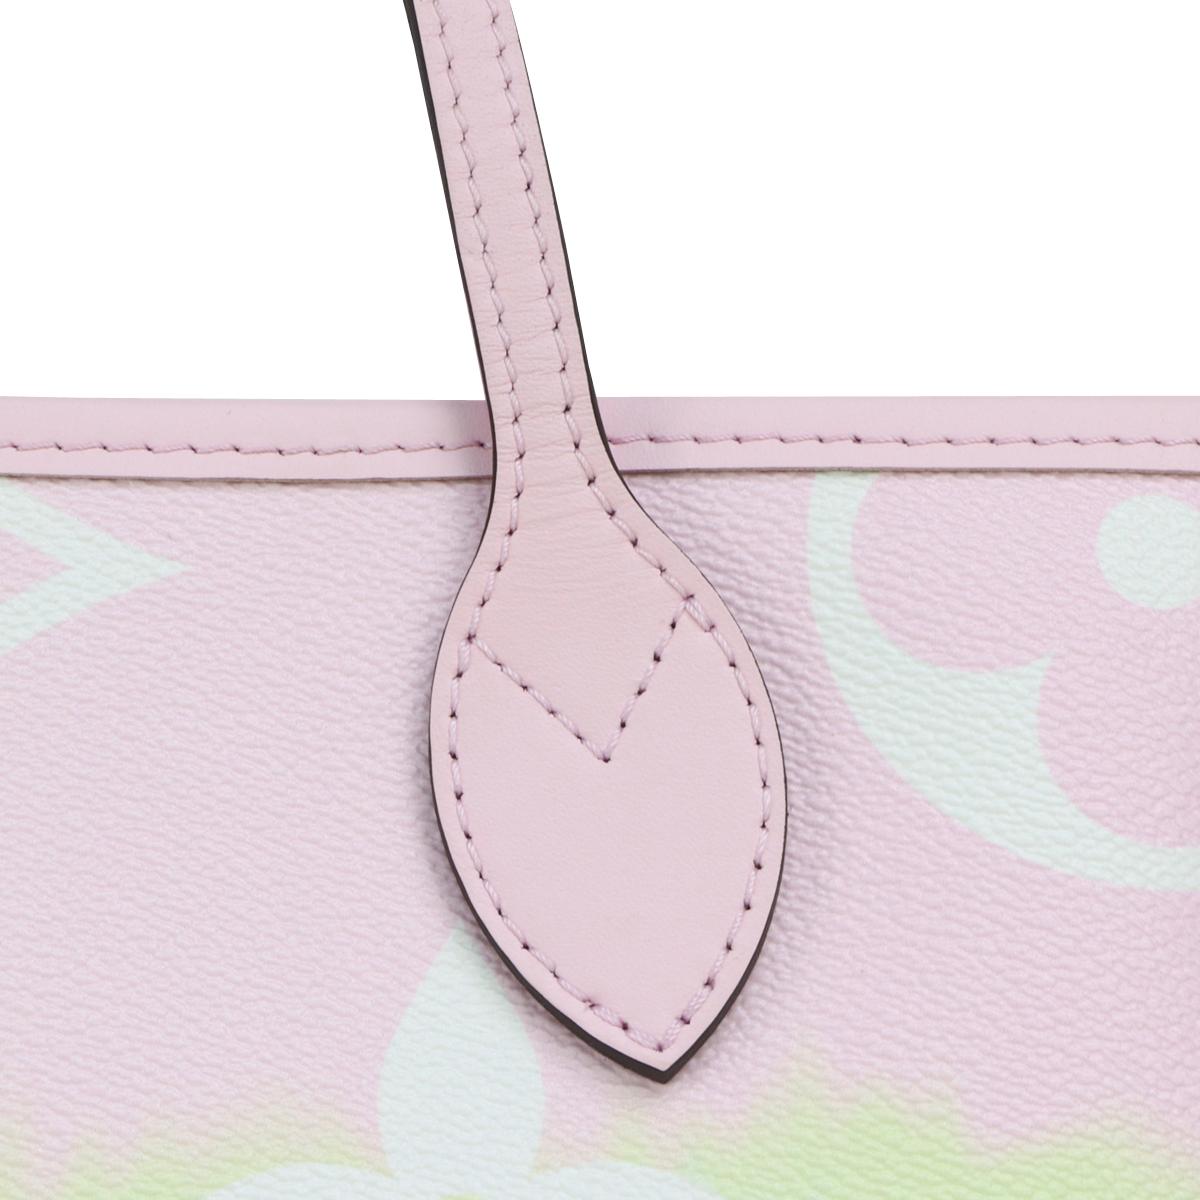 Louis Vuitton Escale Neverfull MM Bag in Pastel 2020 Limited Edition For Sale 4